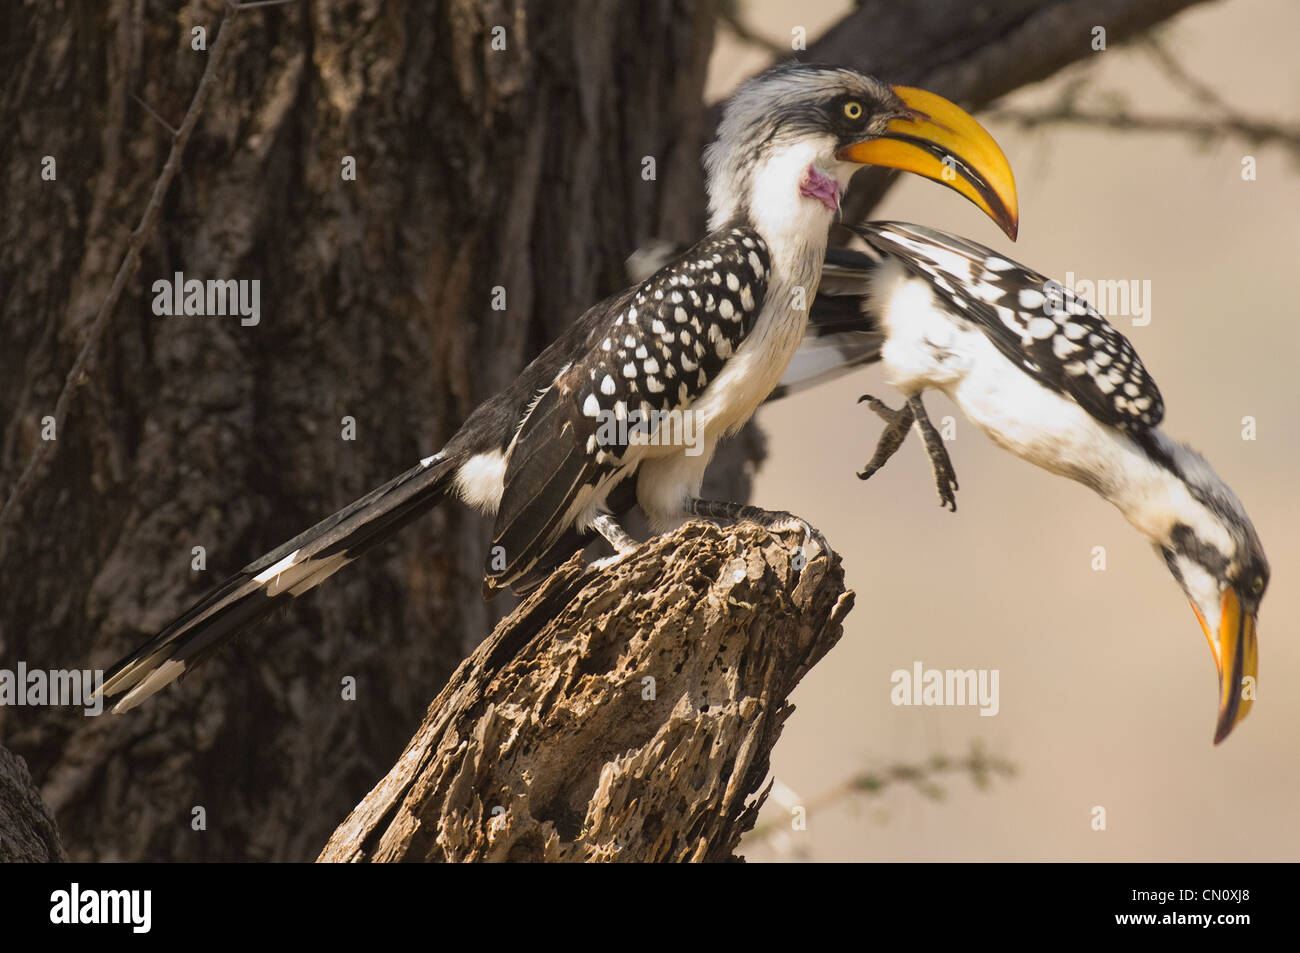 Yellow-billed hornbills by tree cavity, one jumping off Stock Photo